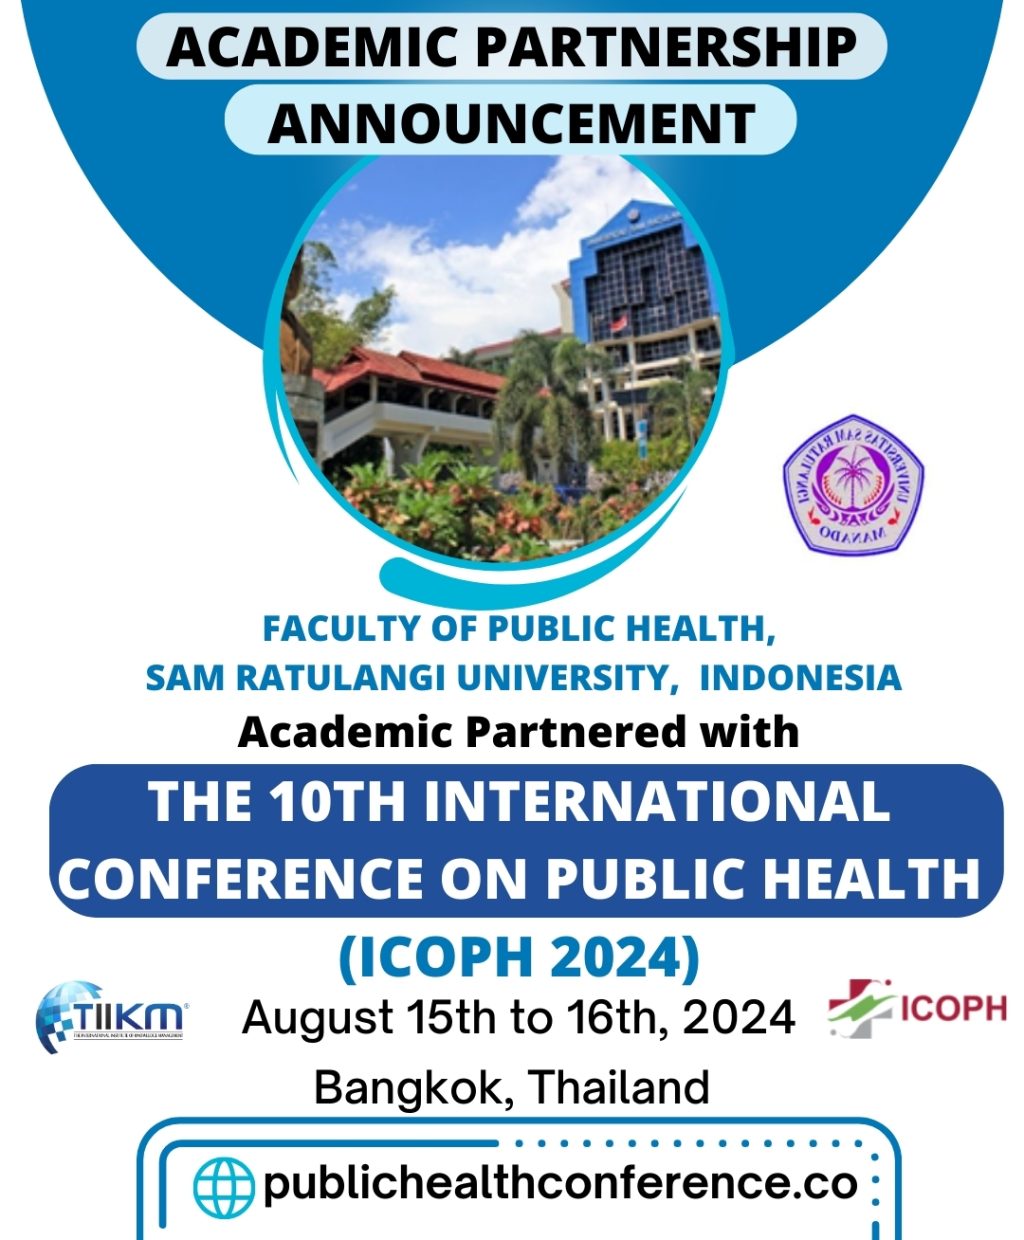 10th International Conference on Public Health 2024